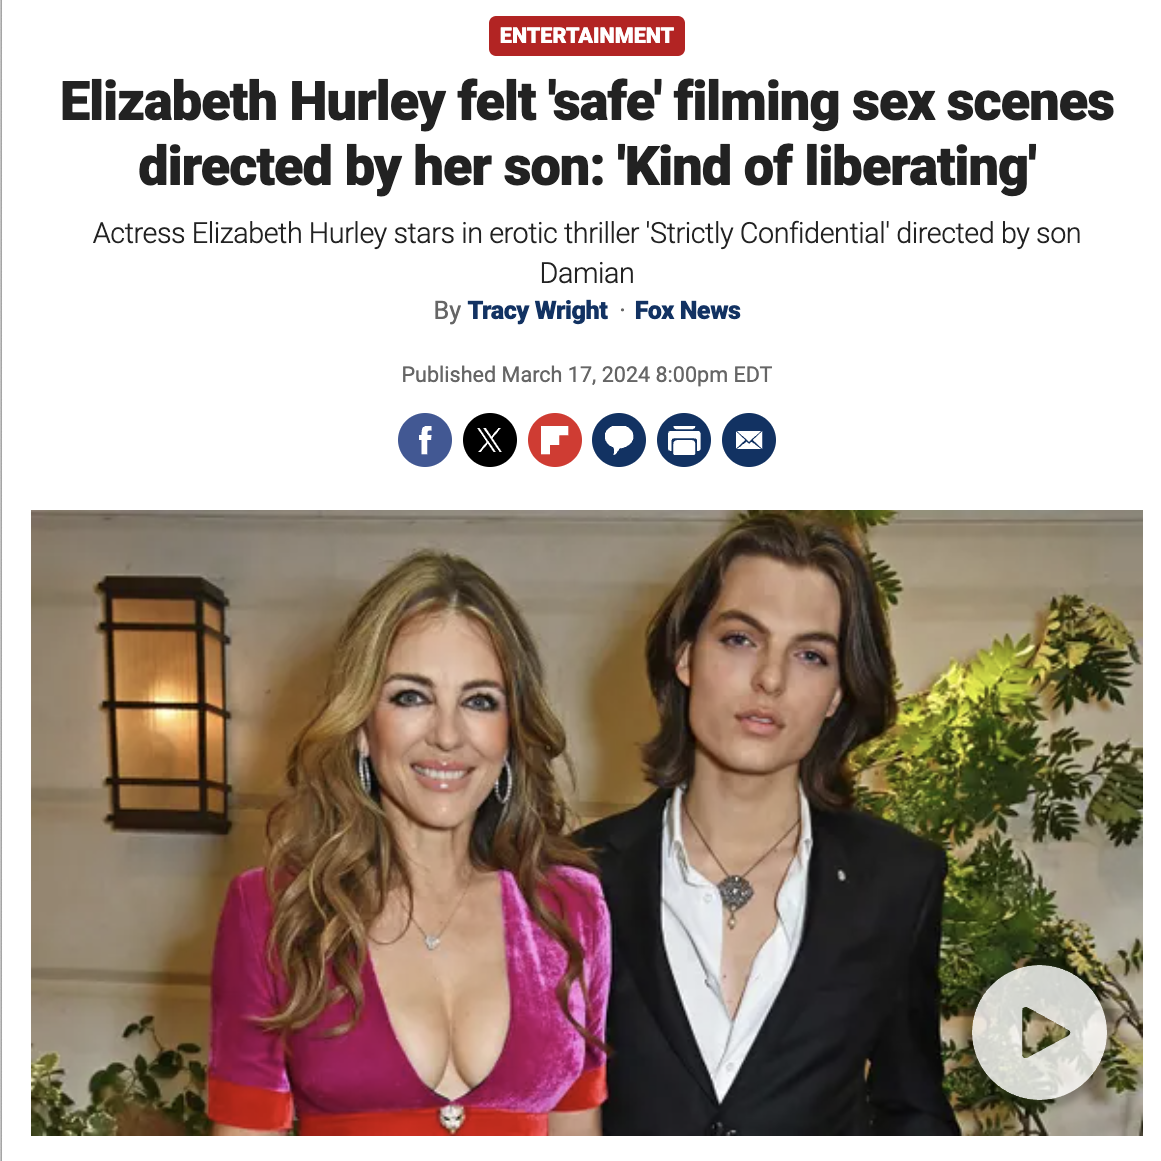 socialite - Entertainment Elizabeth Hurley felt 'safe' filming sex scenes directed by her son 'Kind of liberating' Actress Elizabeth Hurley stars in erotic thriller 'Strictly Confidential' directed by son Damian By Tracy Wright Fox News Published pm Edt f